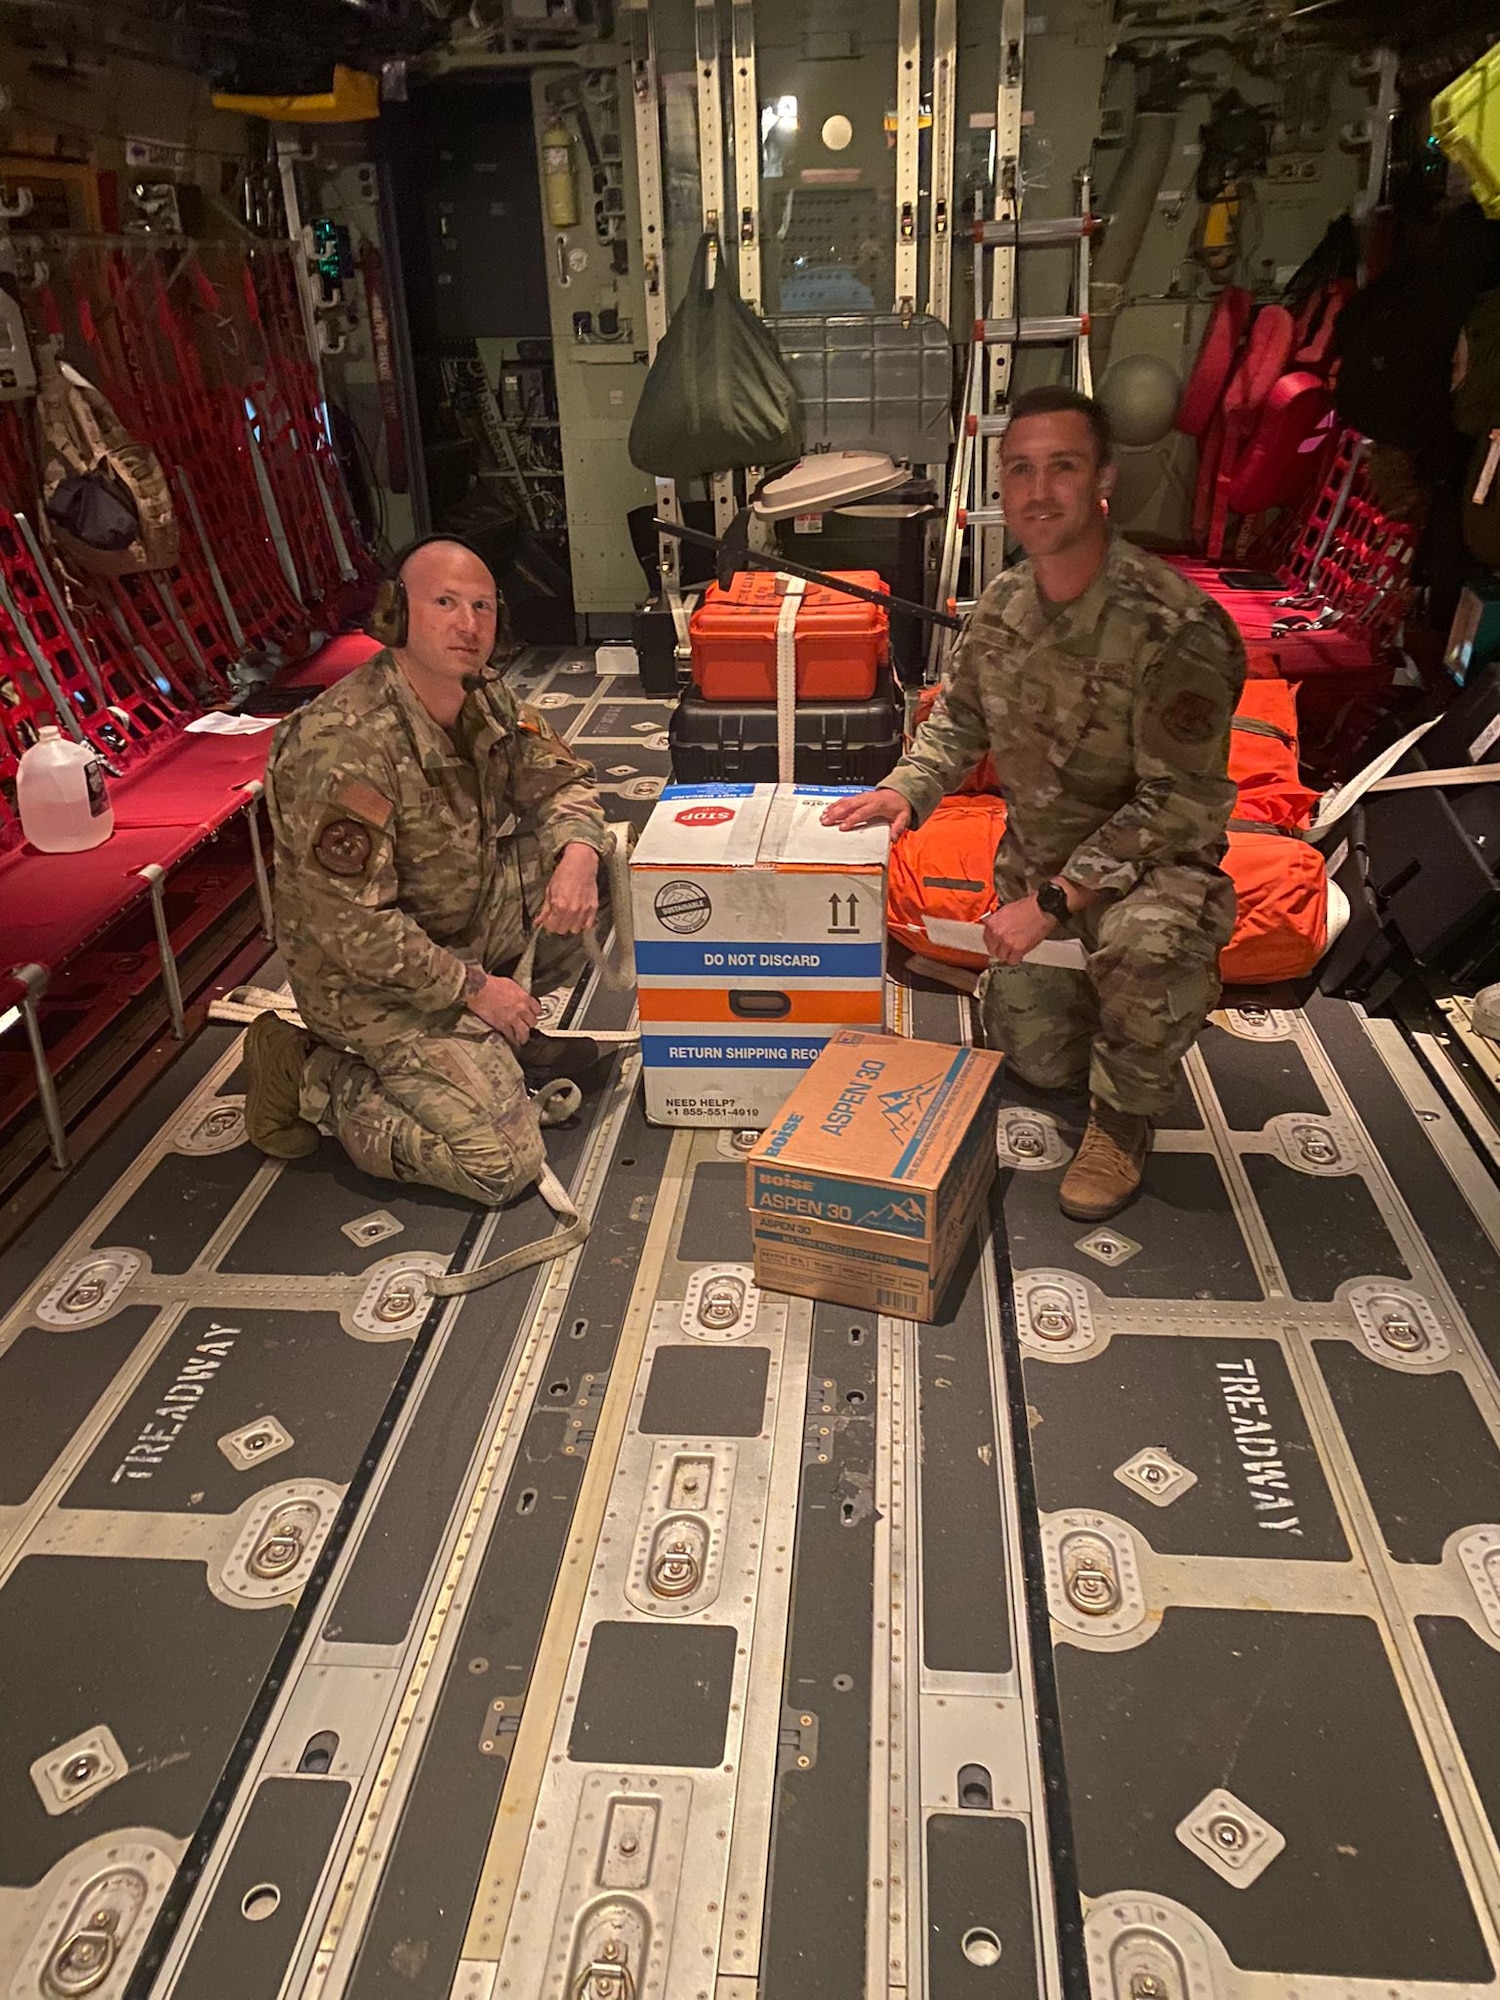 New York Air National Guard’s 106th Rescue Wing Staff Sgt. Brian M. Cotter, a 102nd Rescue Squadron Loadmaster, and Tech. Sgt. John R. Andrejack, a 106th Medical Group bioenvironmental engineer, kneel next to a shipment of Covid-19 vaccines packaged for shipment from the 109th Airlift Wing, Scotia, NY, to the 106th, Westhampton Beach, NY, September 9, 2021. The 106th were out of vaccines prior to their regularly scheduled drill, however they were able to borrow 300 doses from the 109th. Using a 102nd Rescue Squadron previously scheduled training assignment, the Airmen were able to safely transport the vaccines to the base onboard their HC-130J Combat King II aircraft. (U.S. Air National Guard photo courtesy of the 106th Rescue Wing)